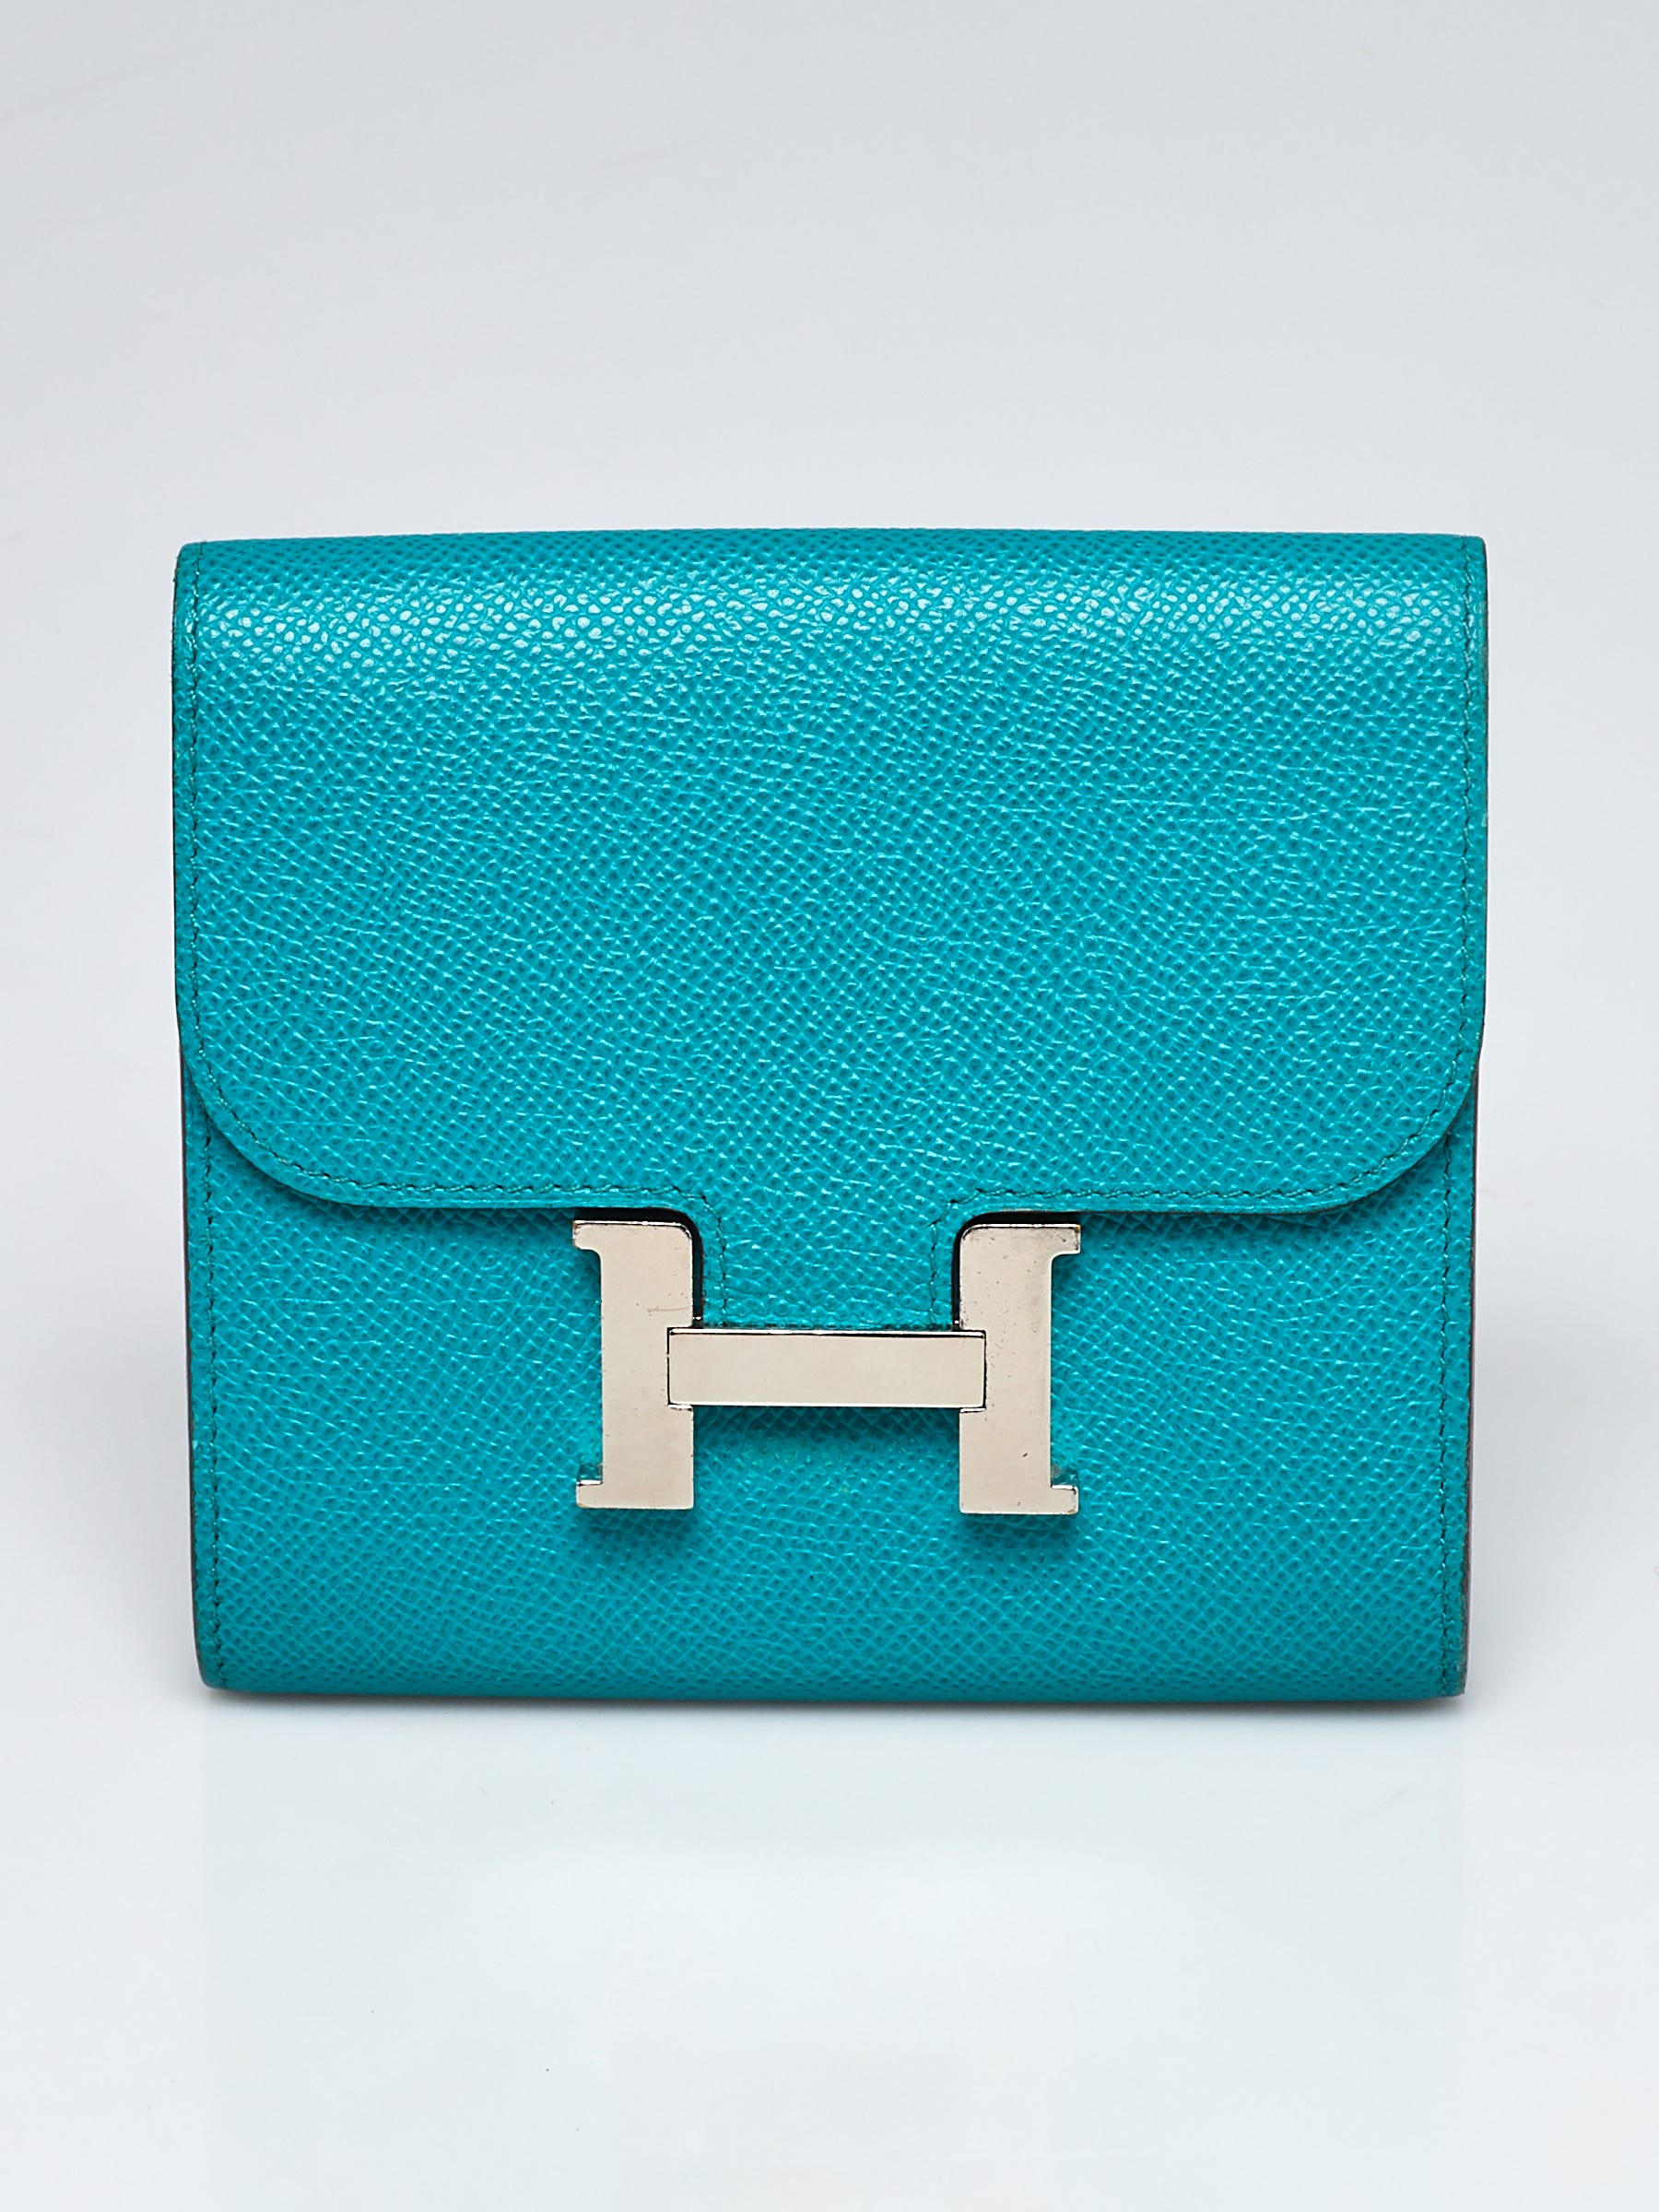 HERMES Constance Compact Wallet Blue Epsom Calfskin Leather Lacquered  Palladium